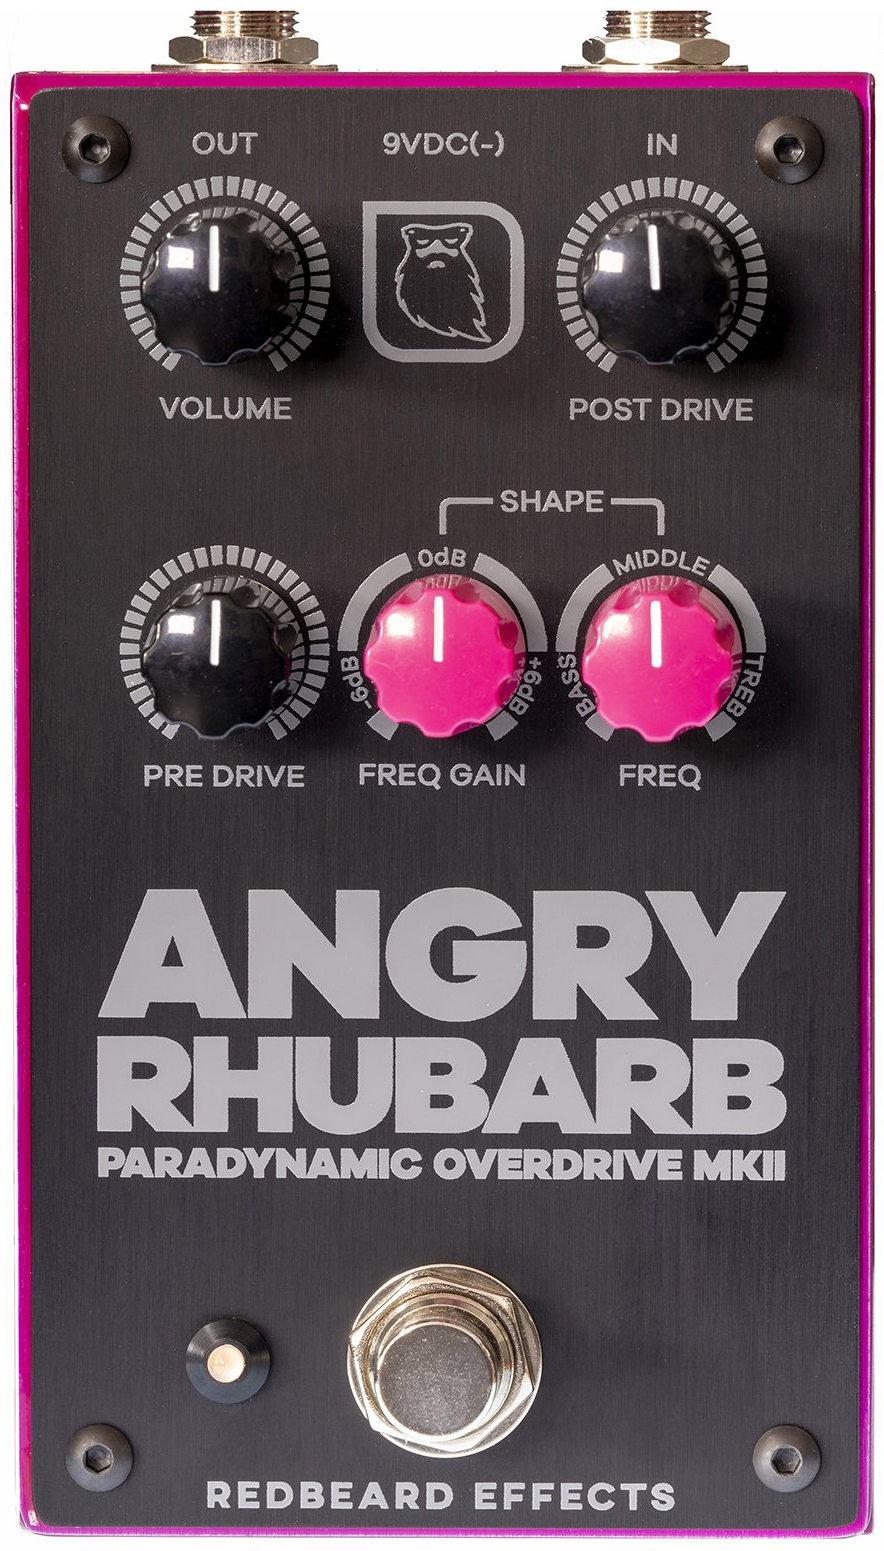 Redbeard Effects Angry Rhubarb Paradynamic Overdrive Mkii - Overdrive, distortion & fuzz effect pedal - Main picture